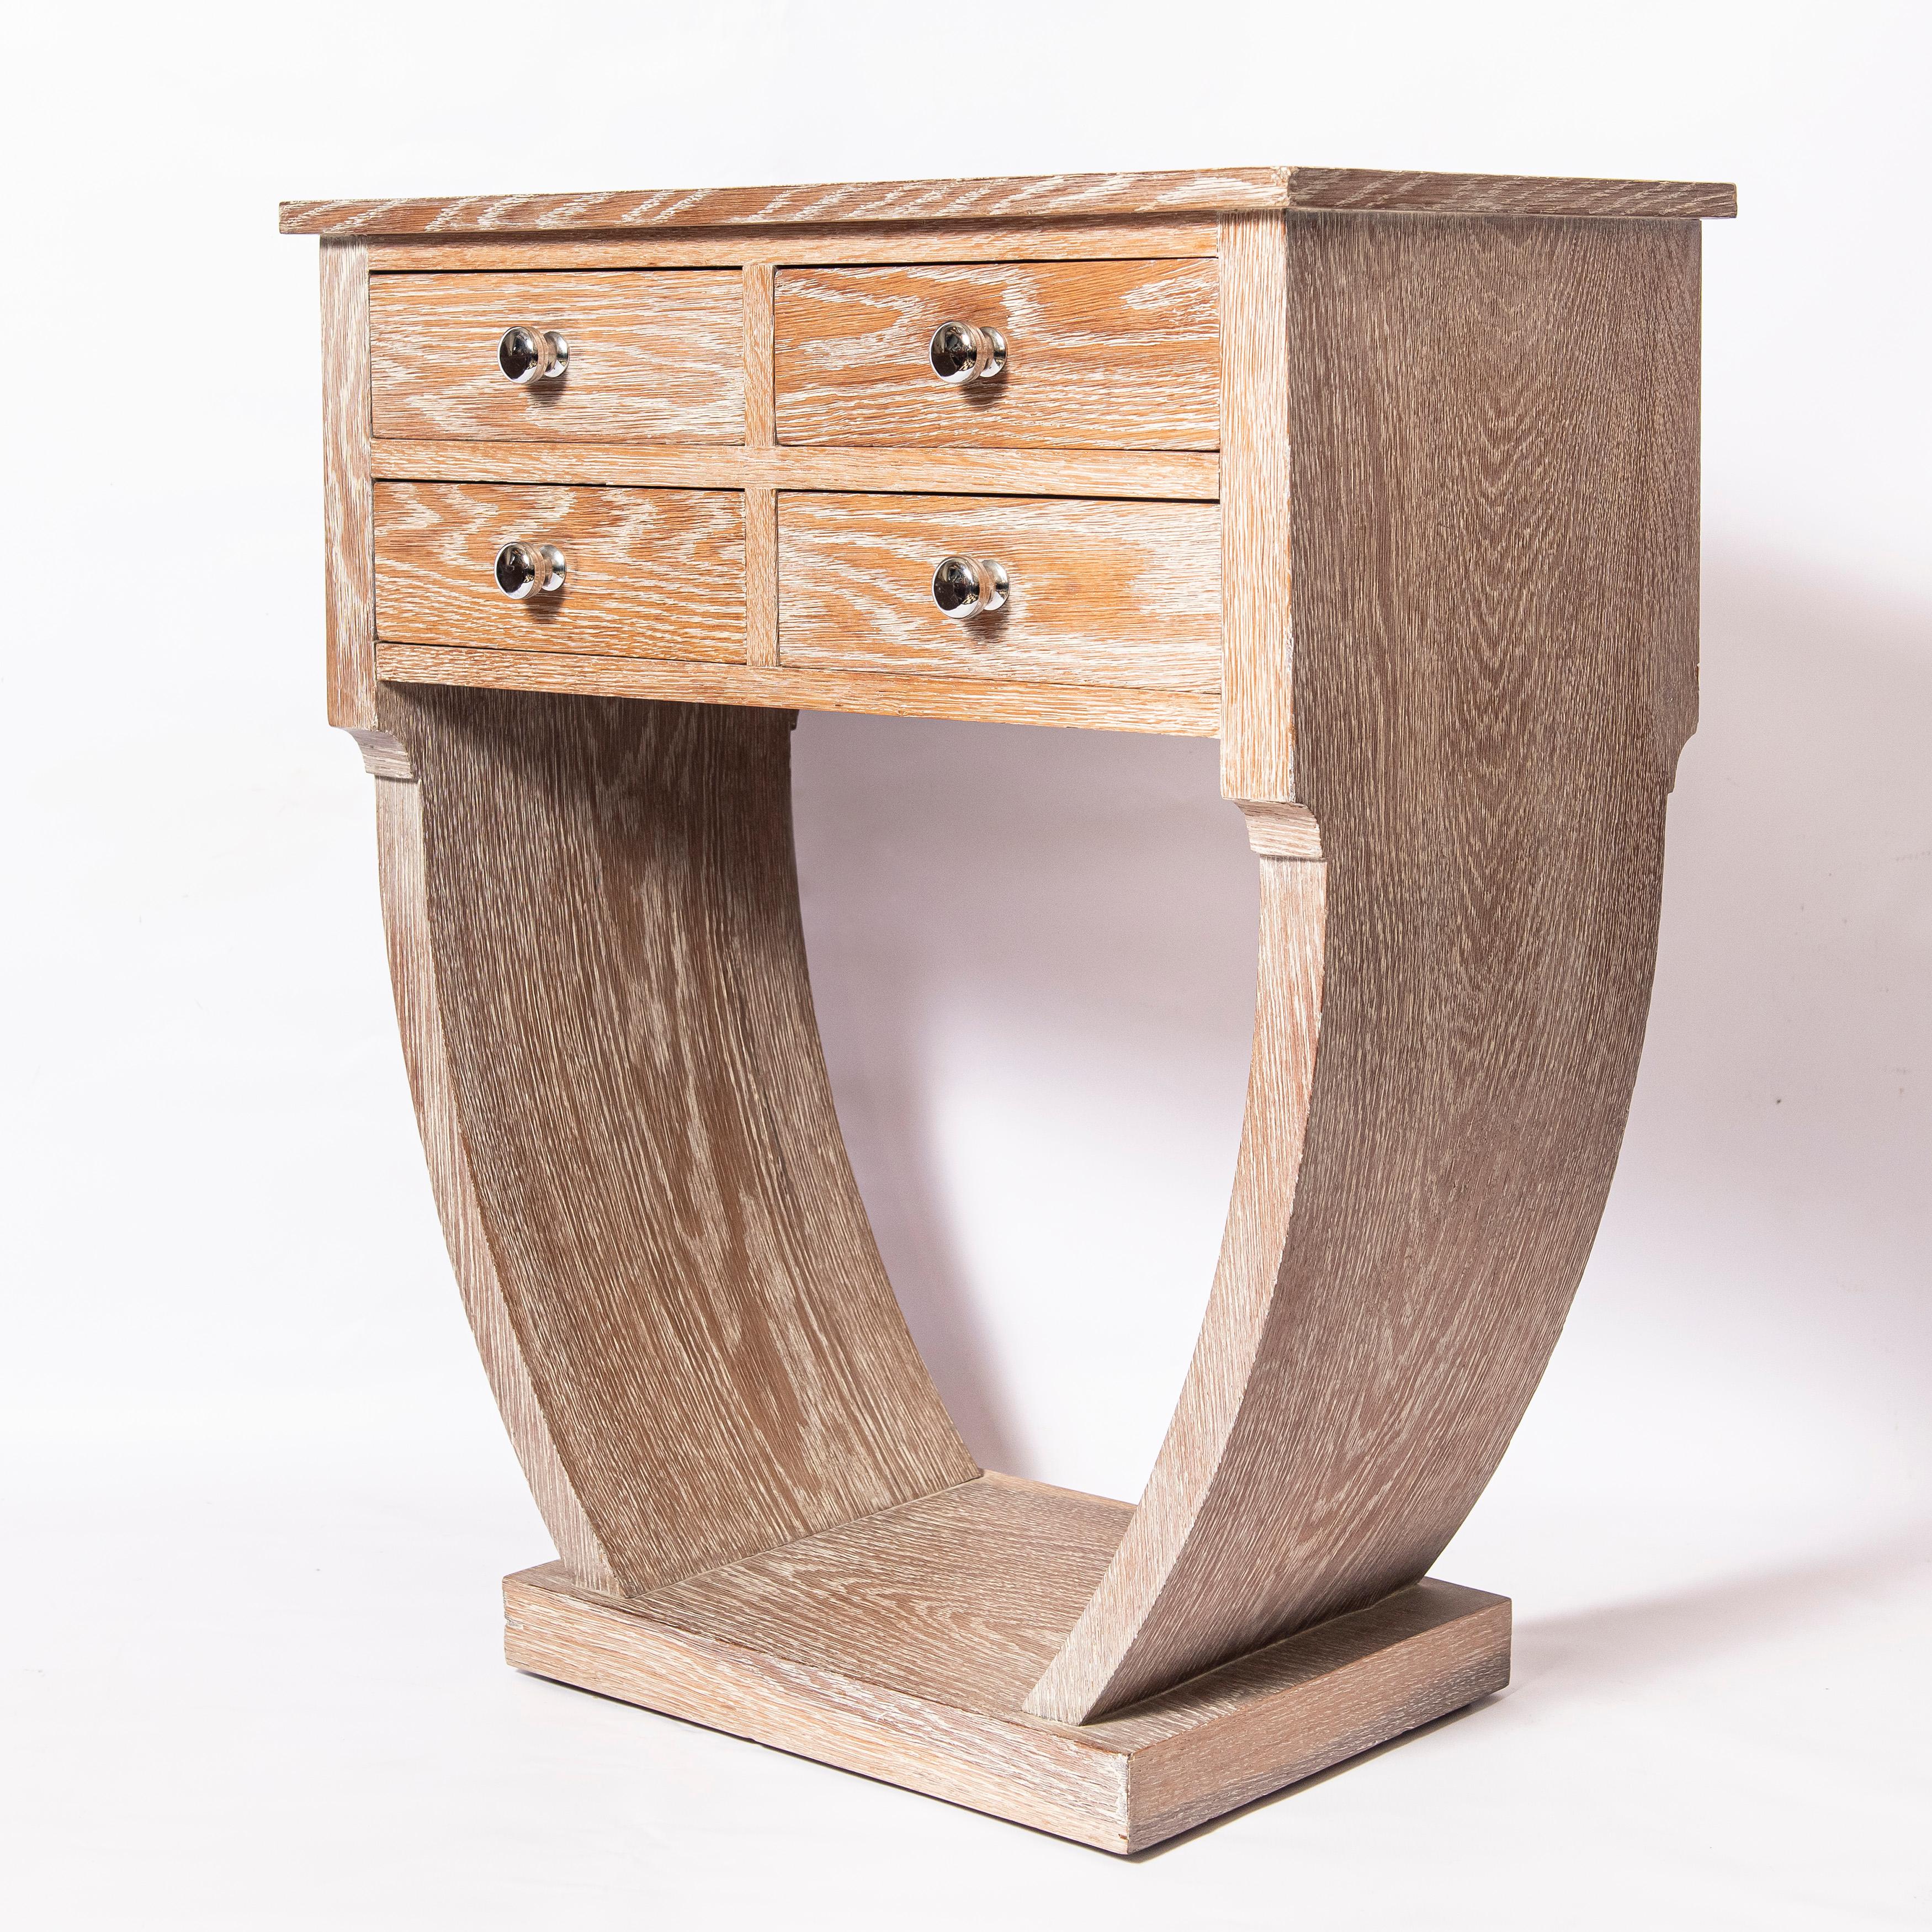 Limed oak console table with drawers. Art Deco period, France, circa 1940.